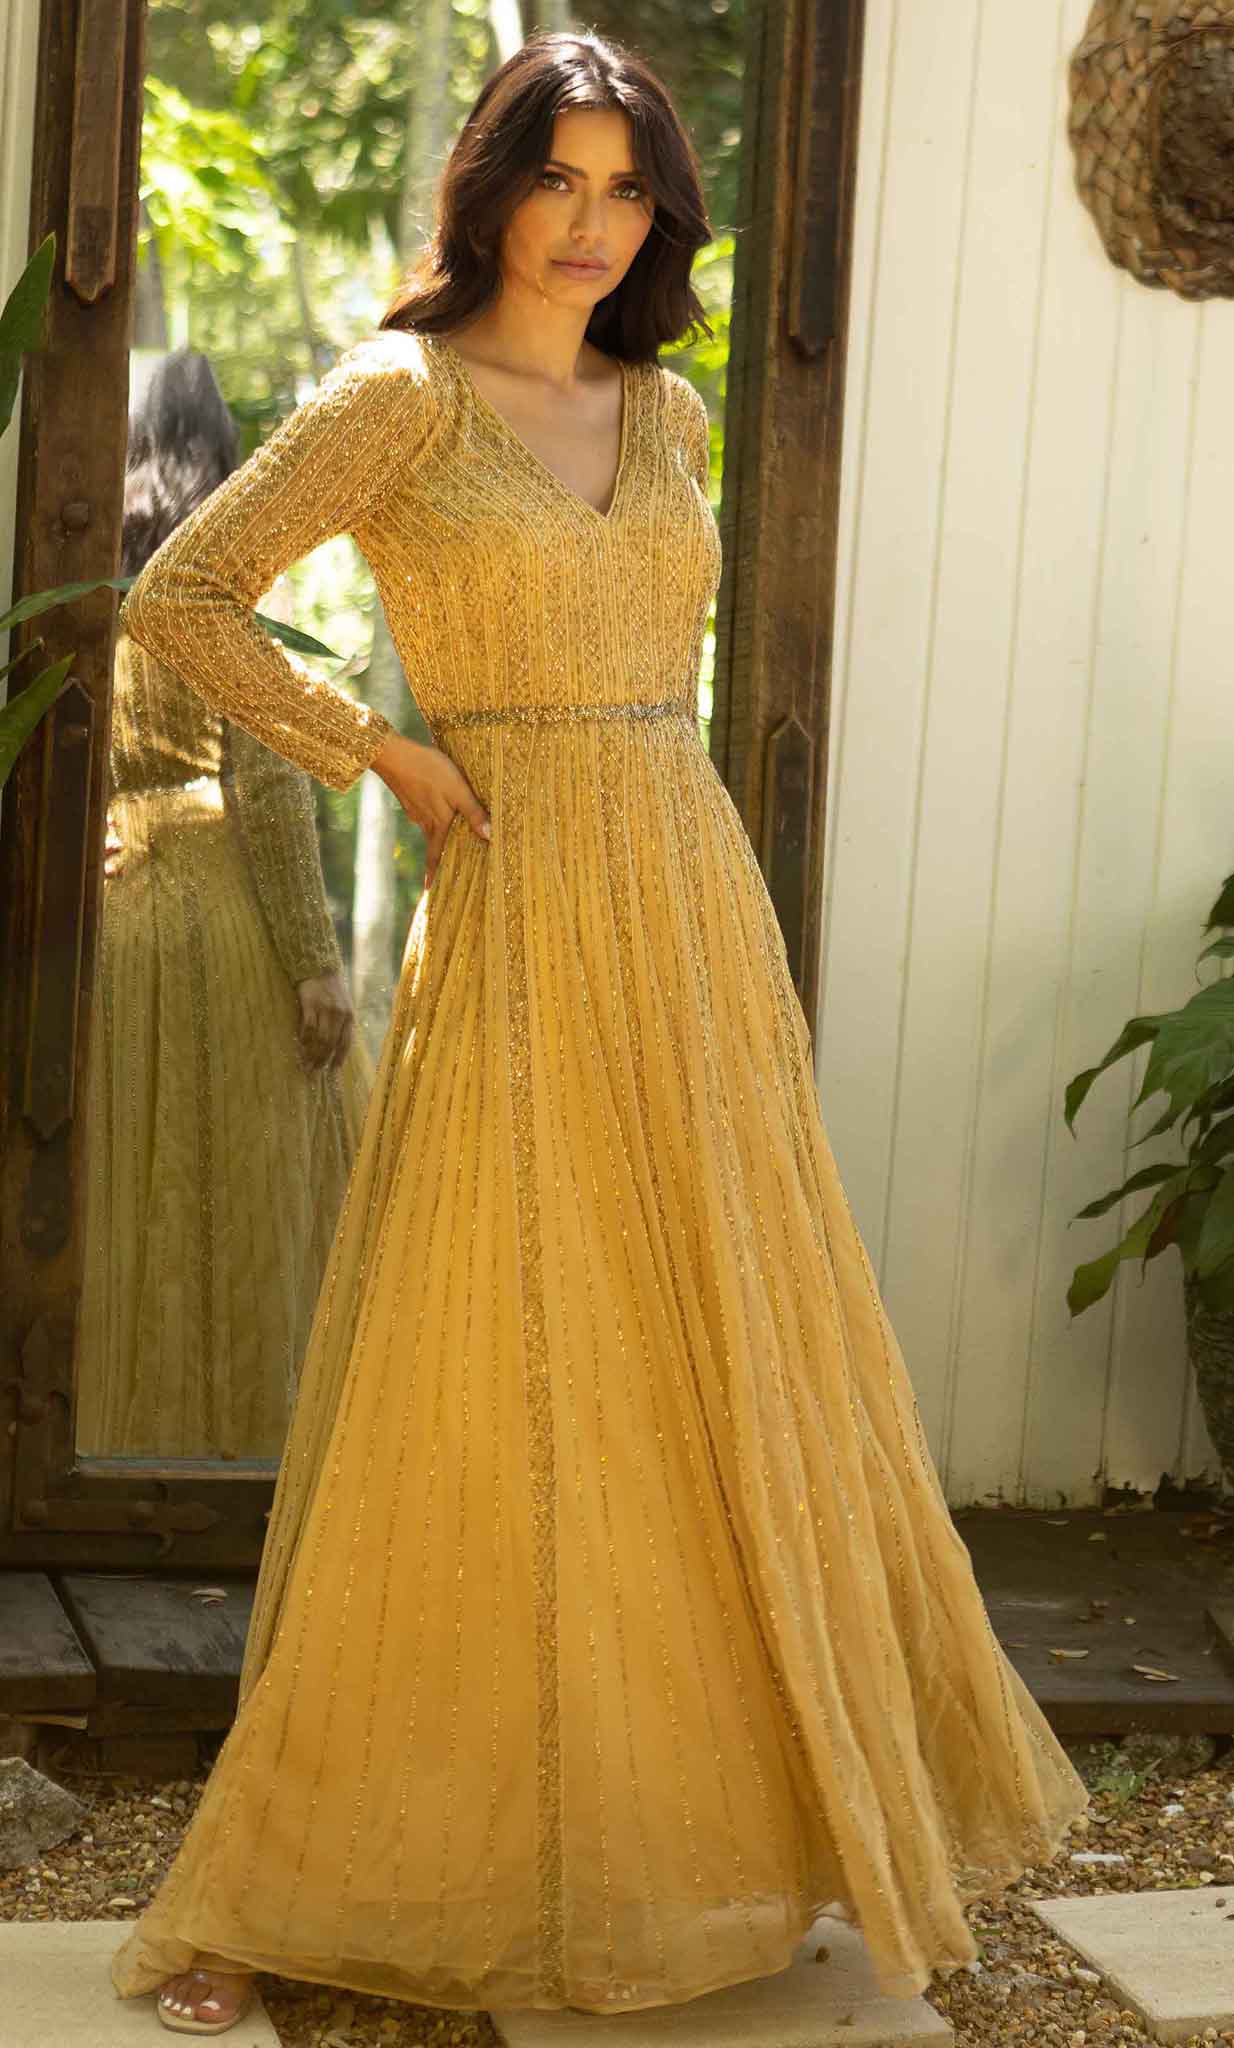 Primavera Couture 12010 - Modest Long Sleeve A-line Gown
